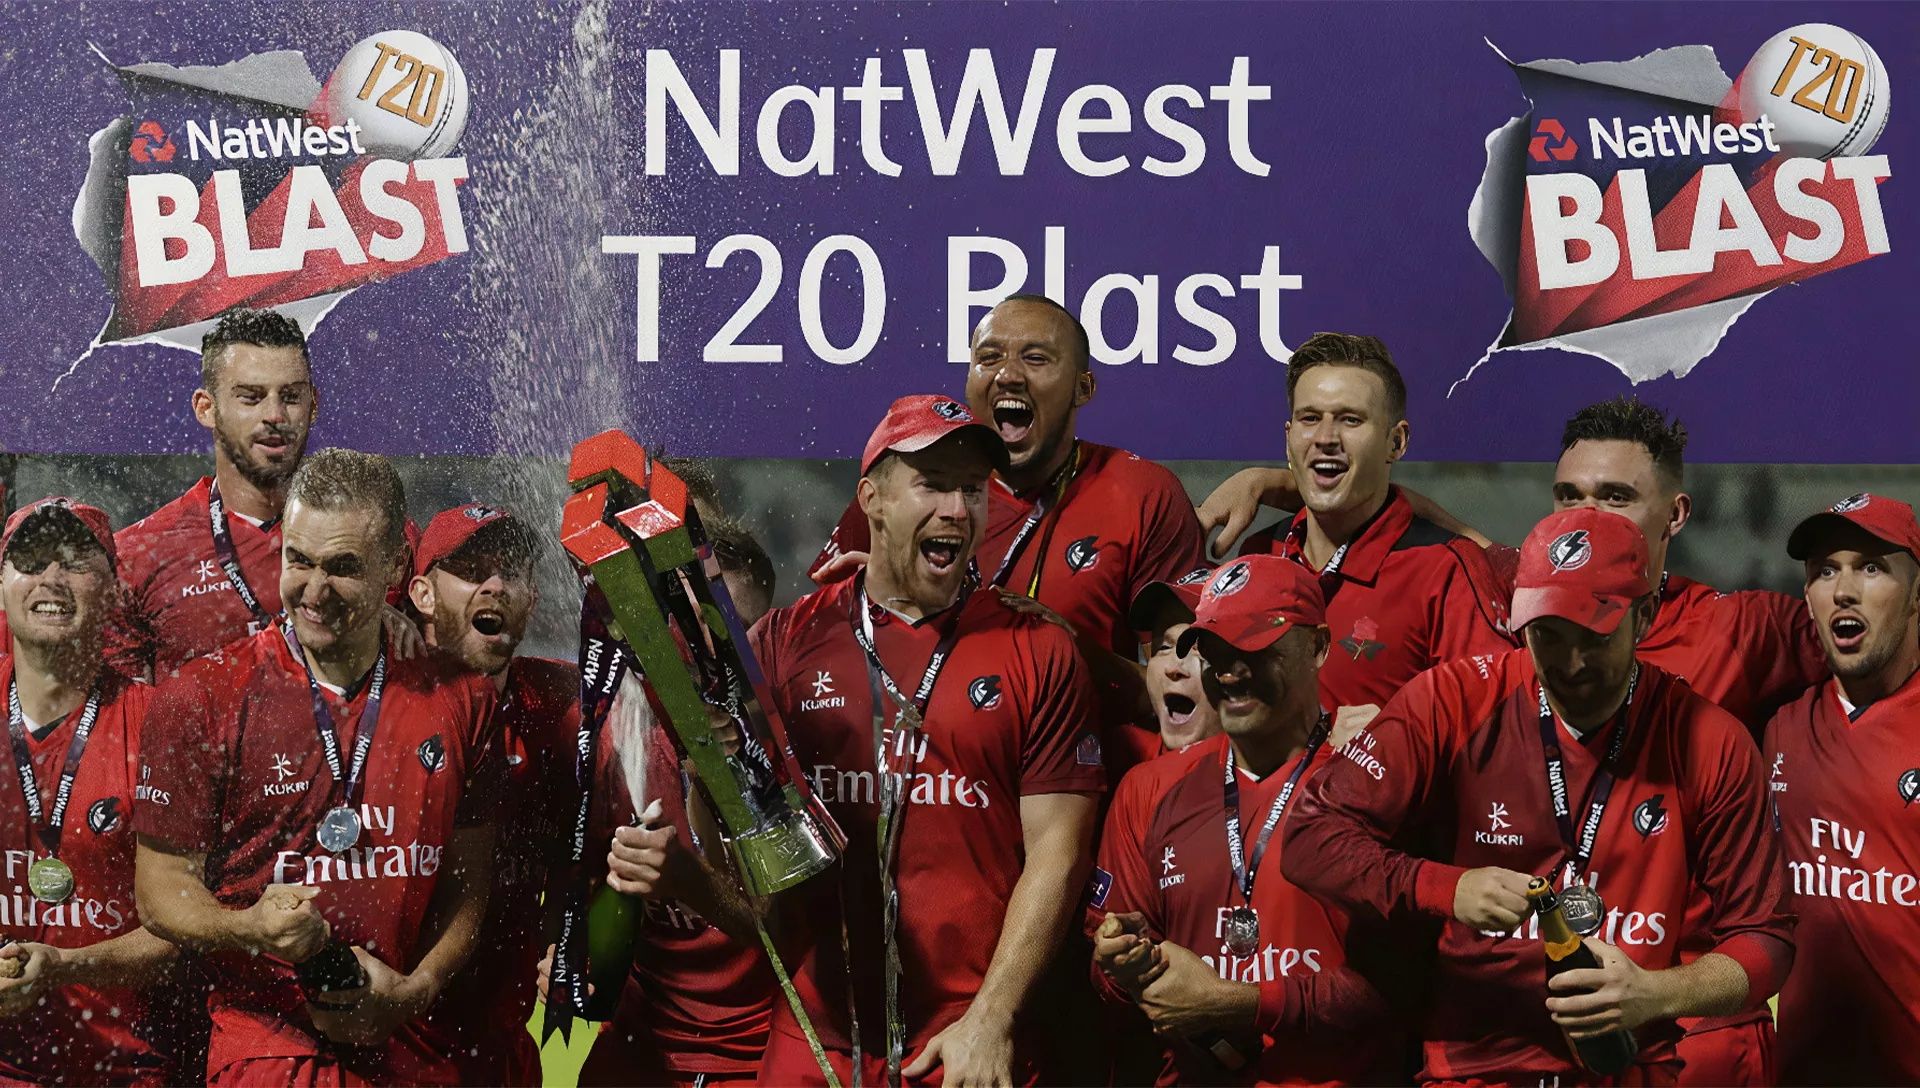 You can place bets on England NatWest T20 Blast League after registering on the site.